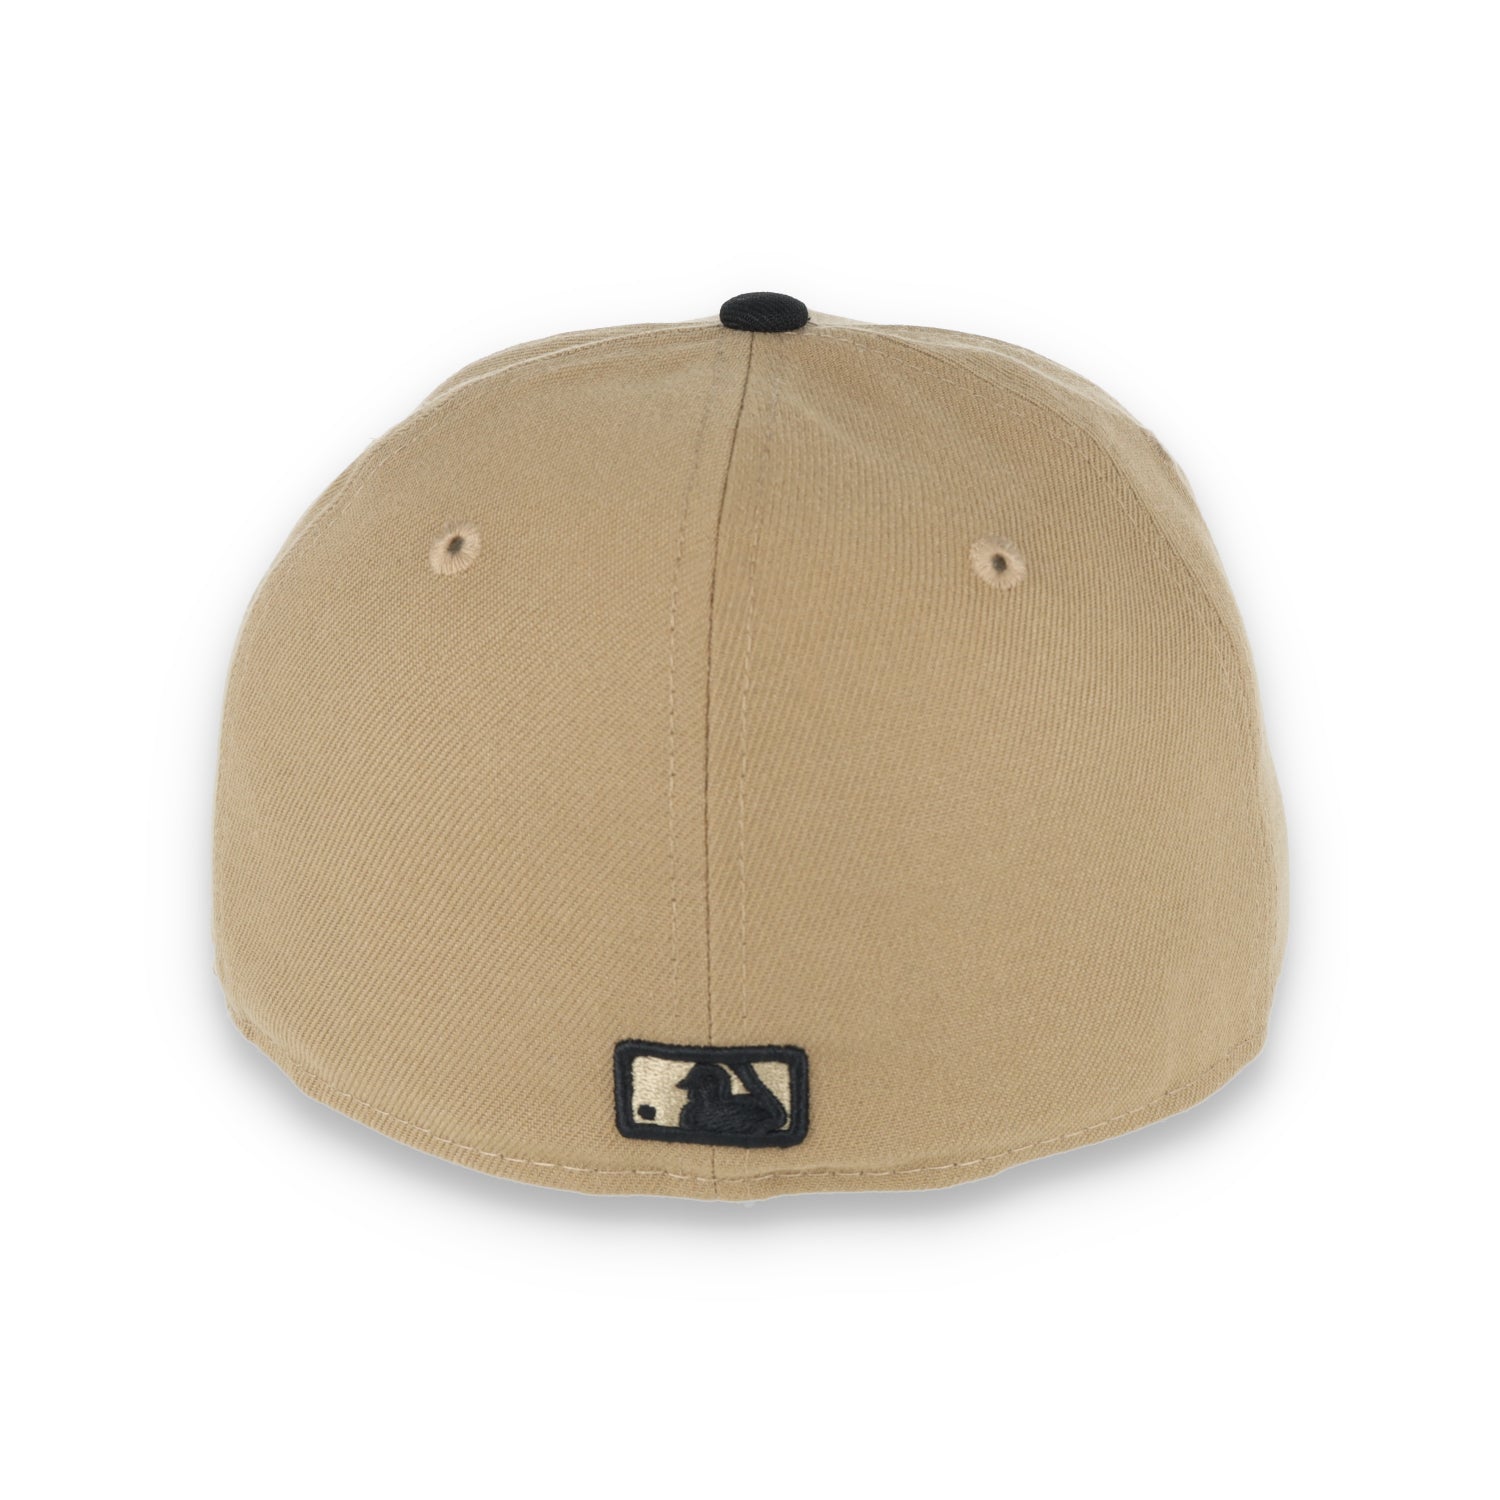 New Era San Francisco Giants Rose 59FIFTY Fitted Hat-Khaki